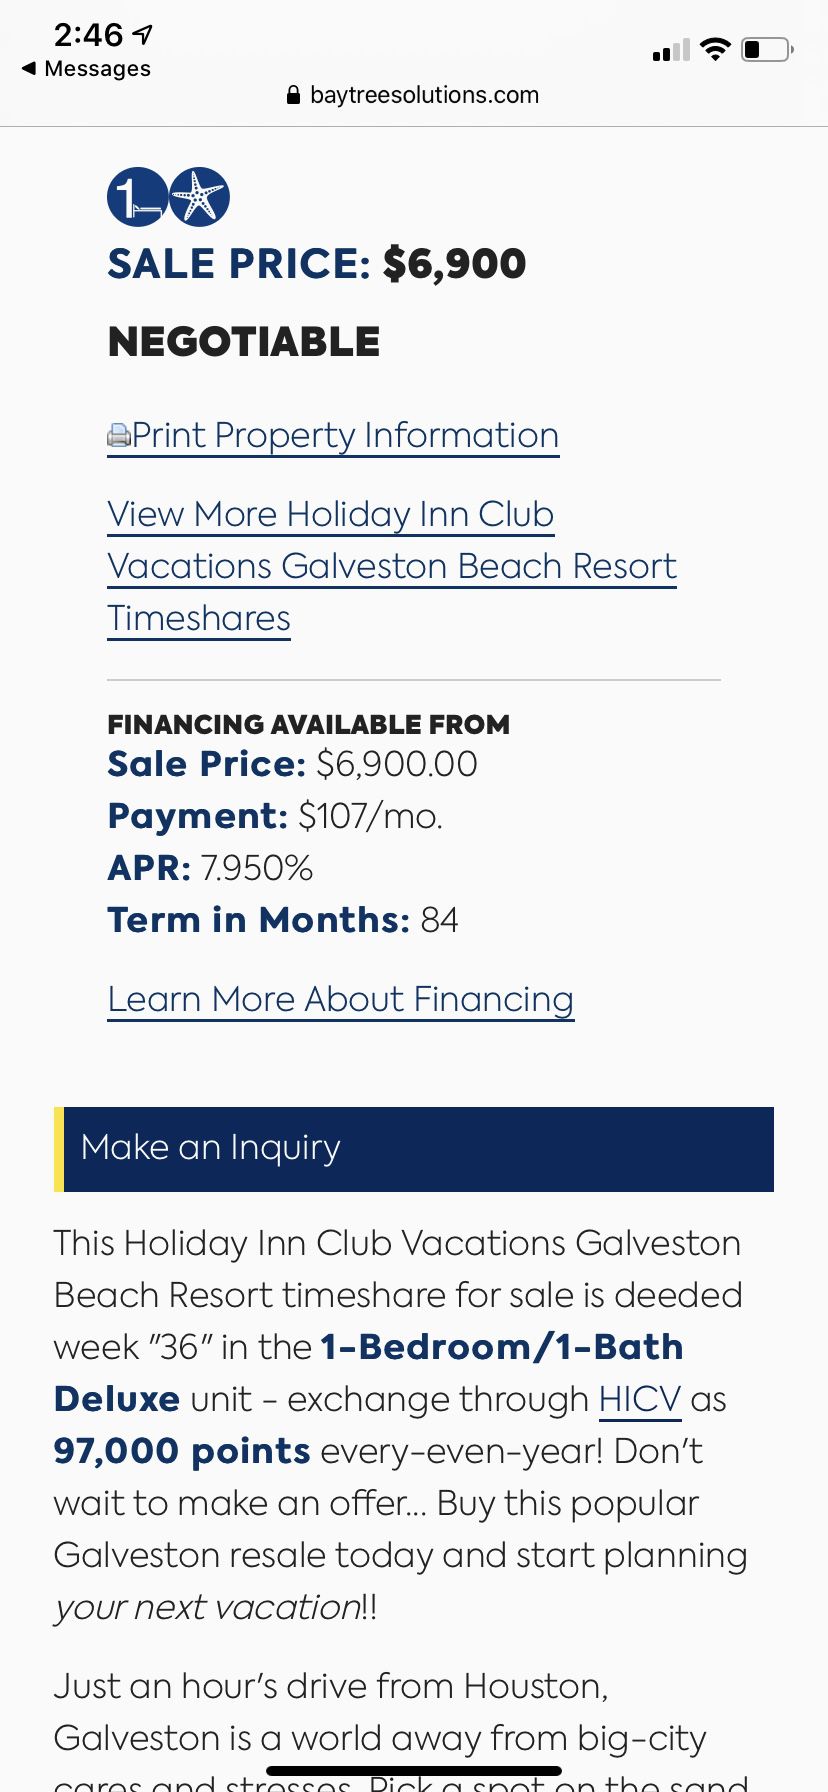 Holiday Inn Club Vacations Galveston Beach Resort can be used at any Holiday Inn Vacation sites and/or RCI